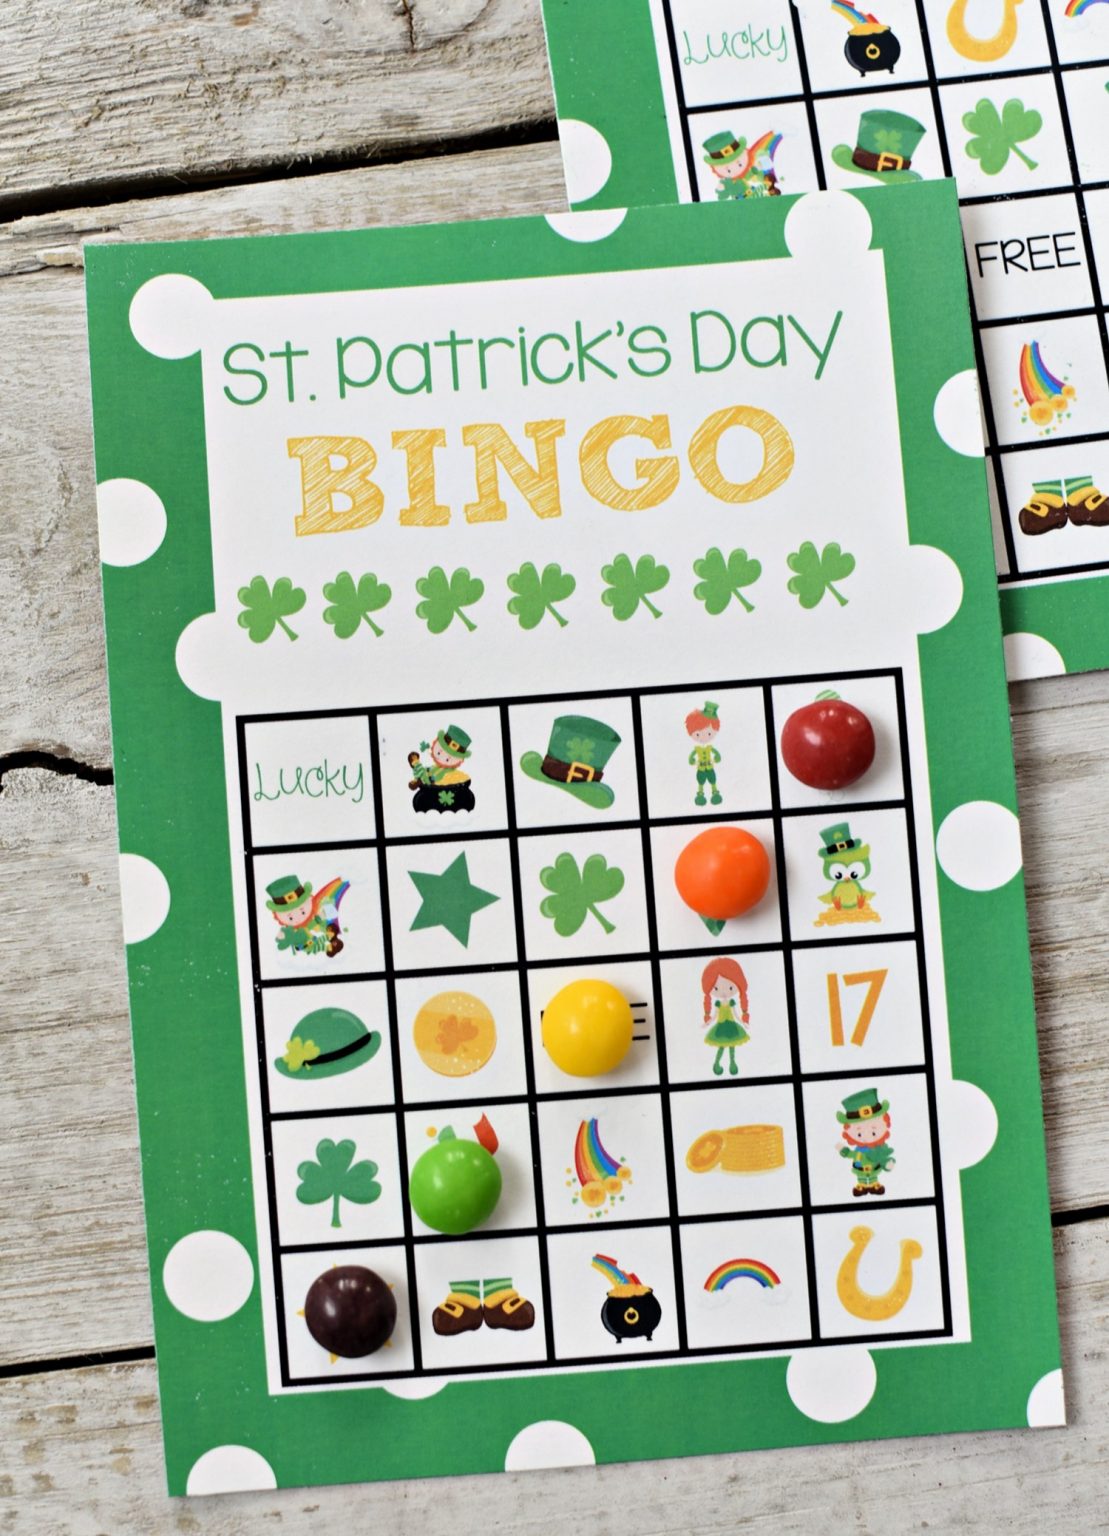 st-patrick-s-day-bingo-game-crazy-little-projects